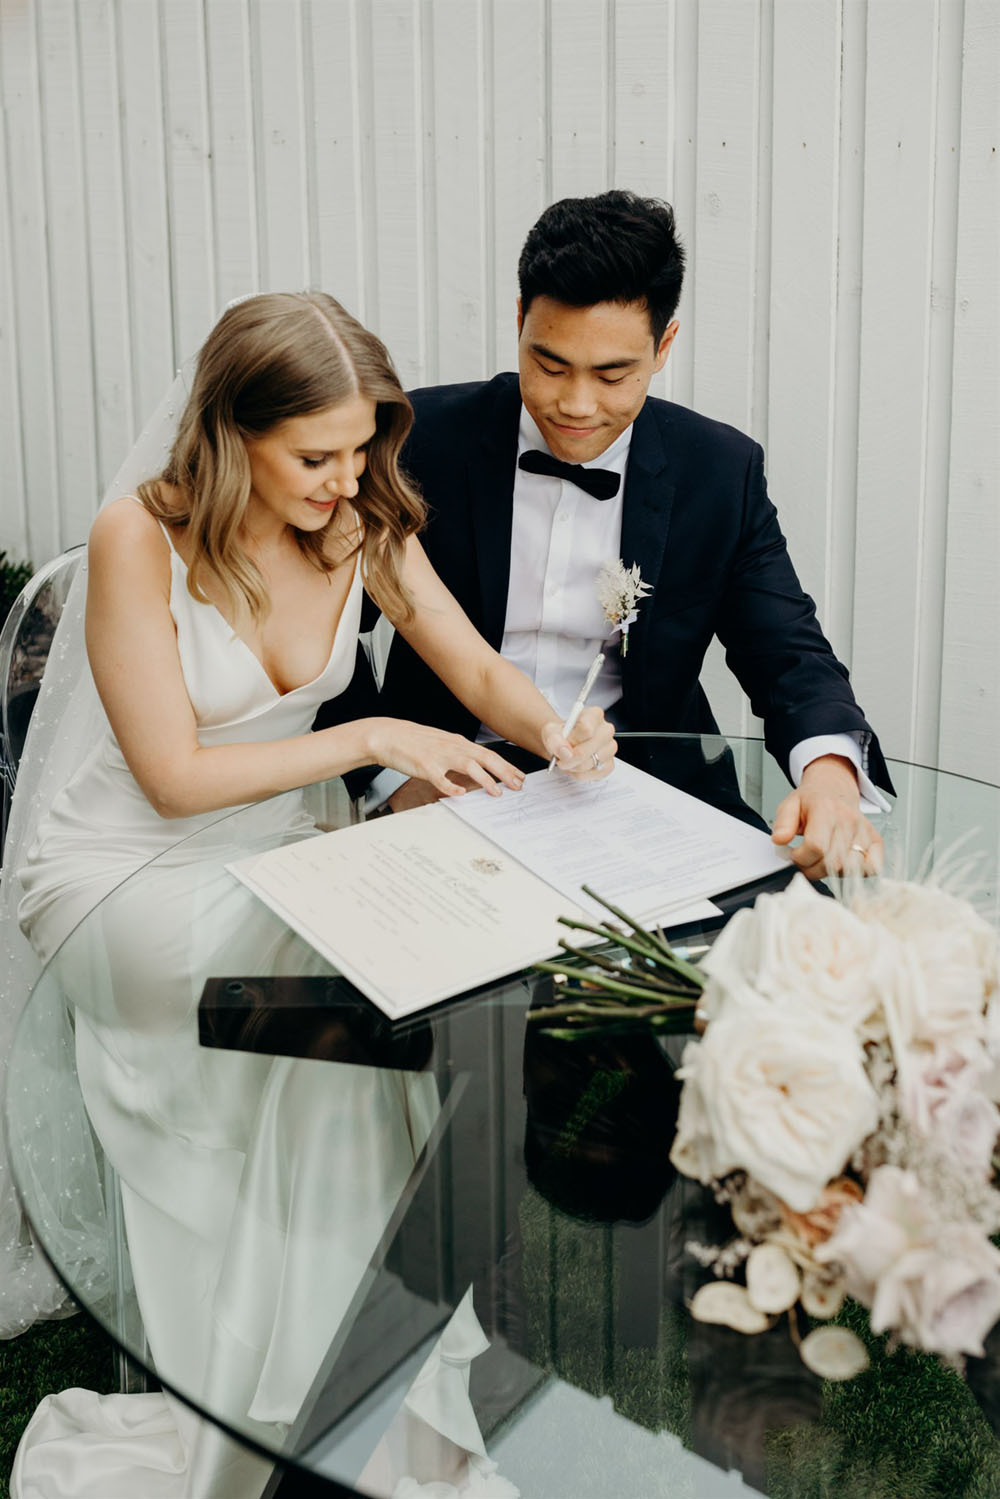 The pretty neutrals and florals in this Australian wedding will have you swooning